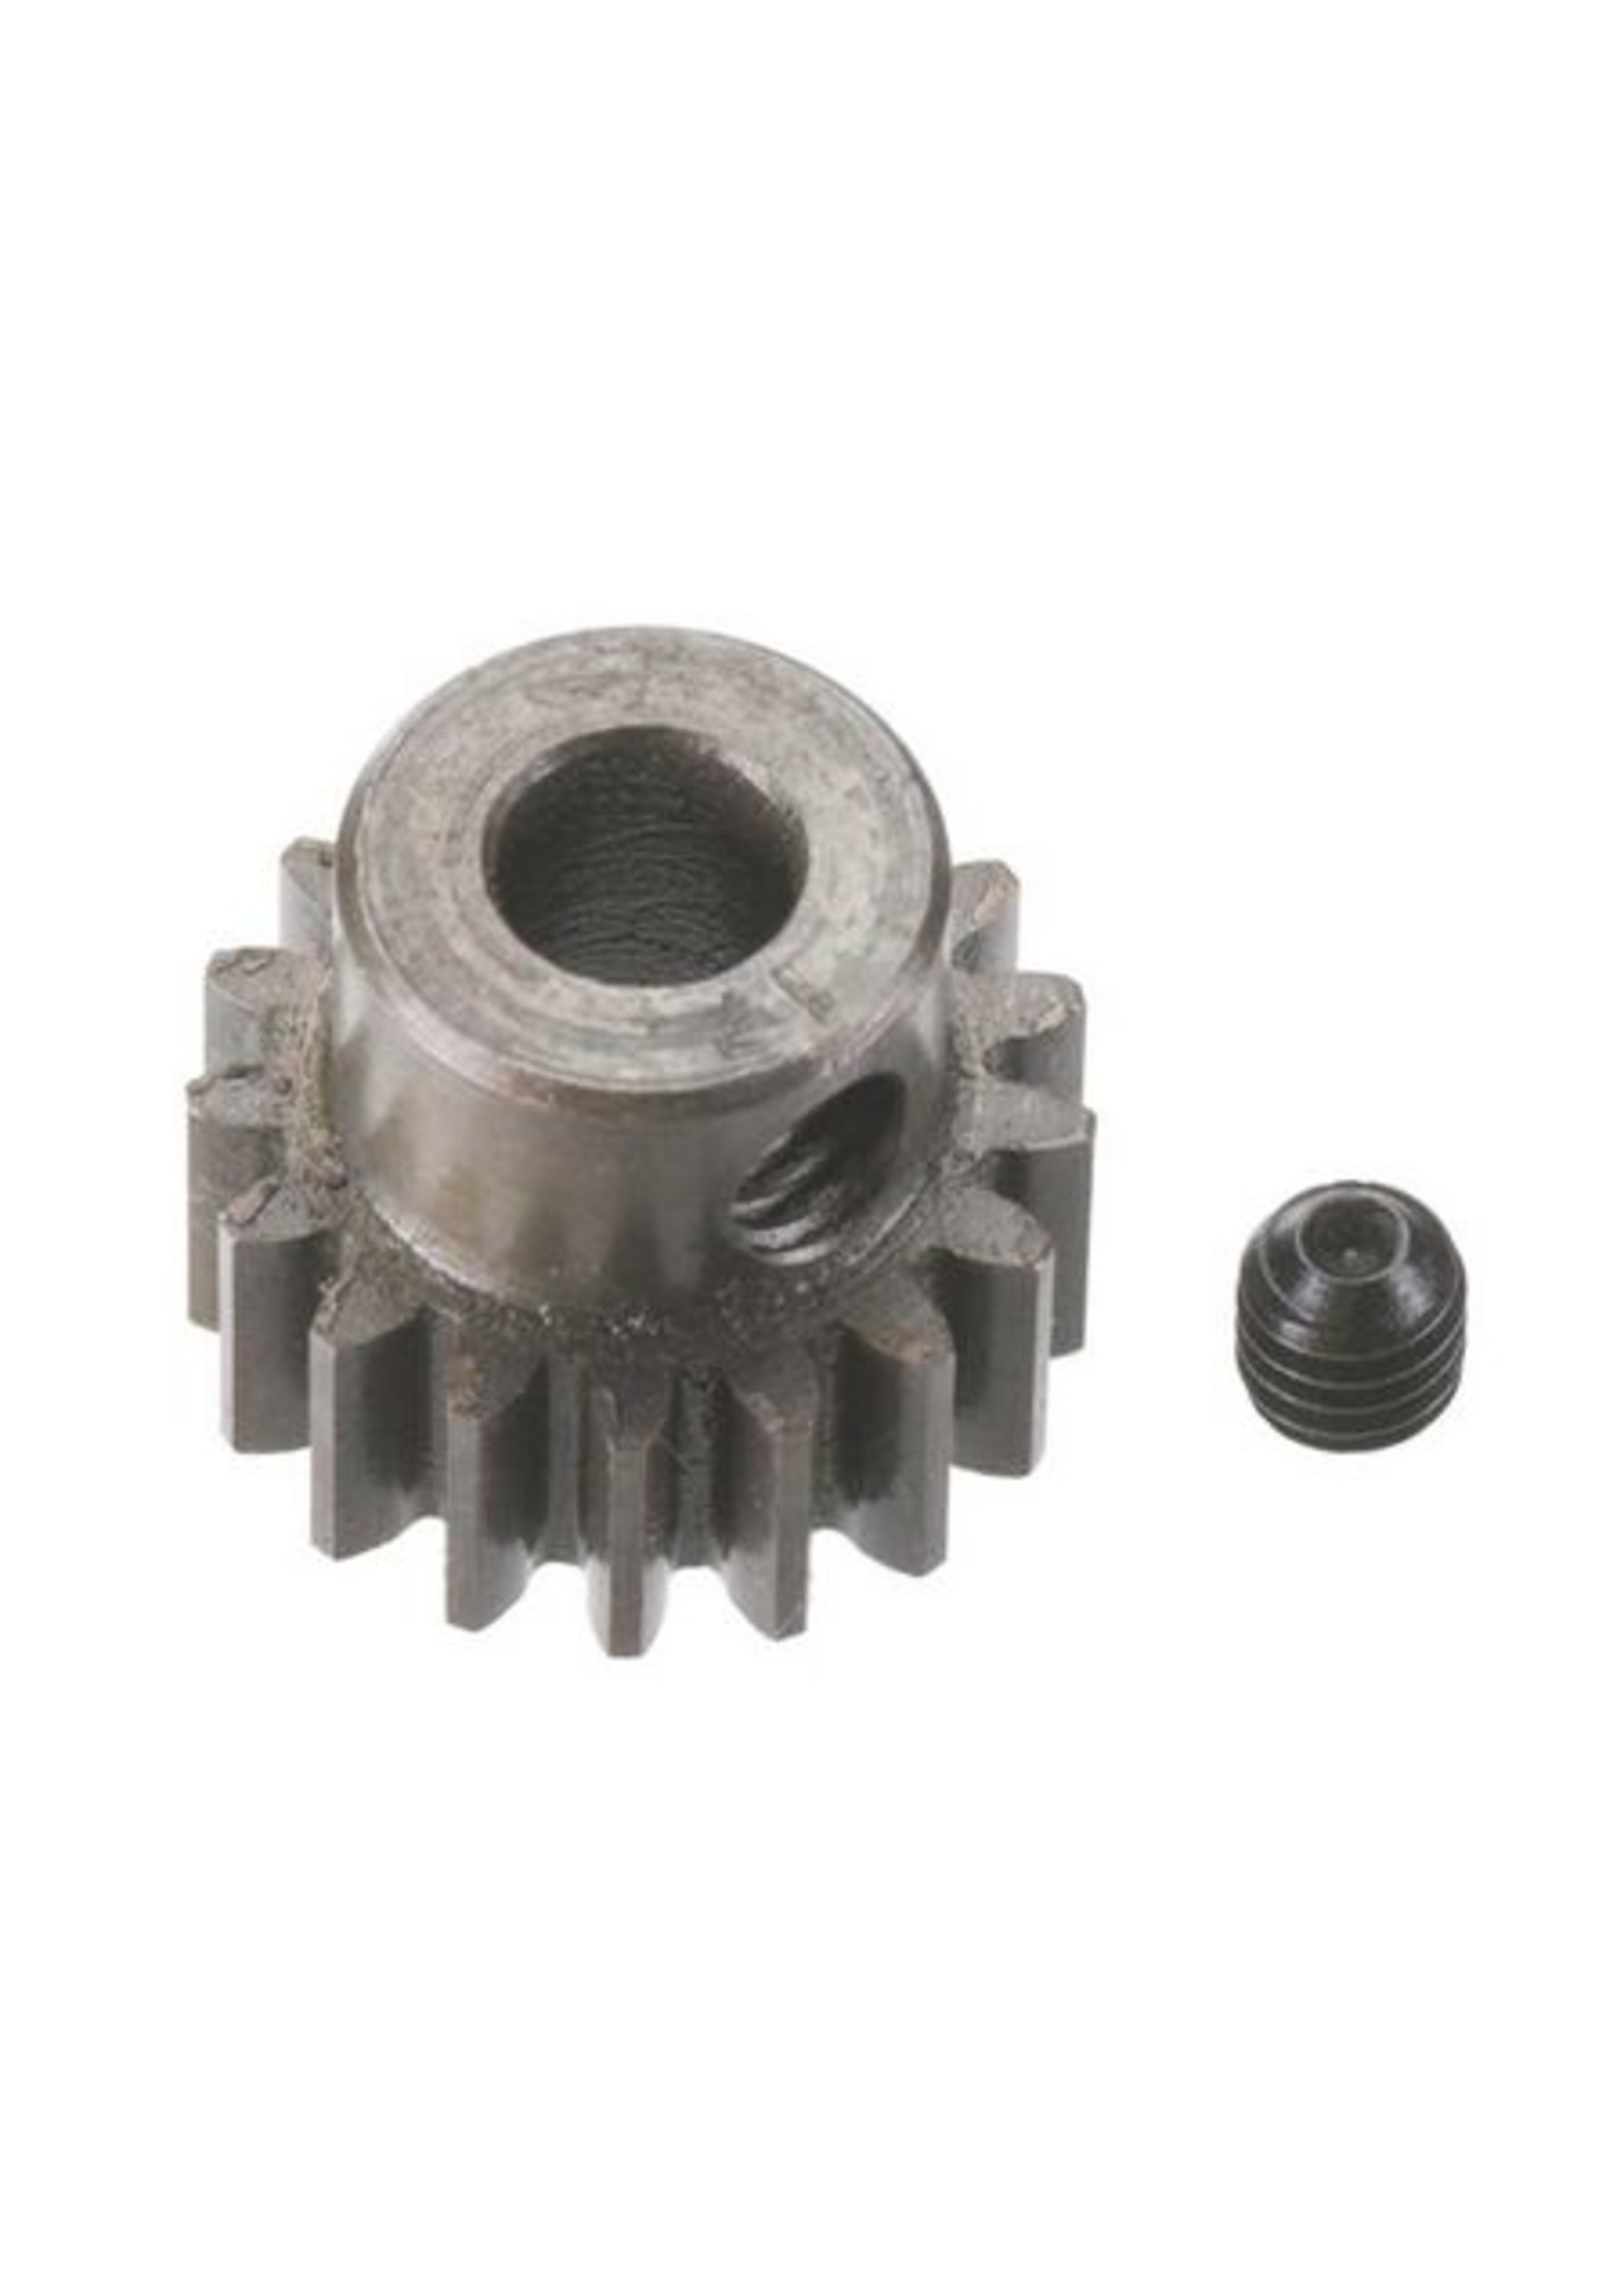 Robinson Racing Products RRP8717 Robinson Racing Products Extra Hard Steel .8 Mod Pinion Gear w/5mm Bore (17T)